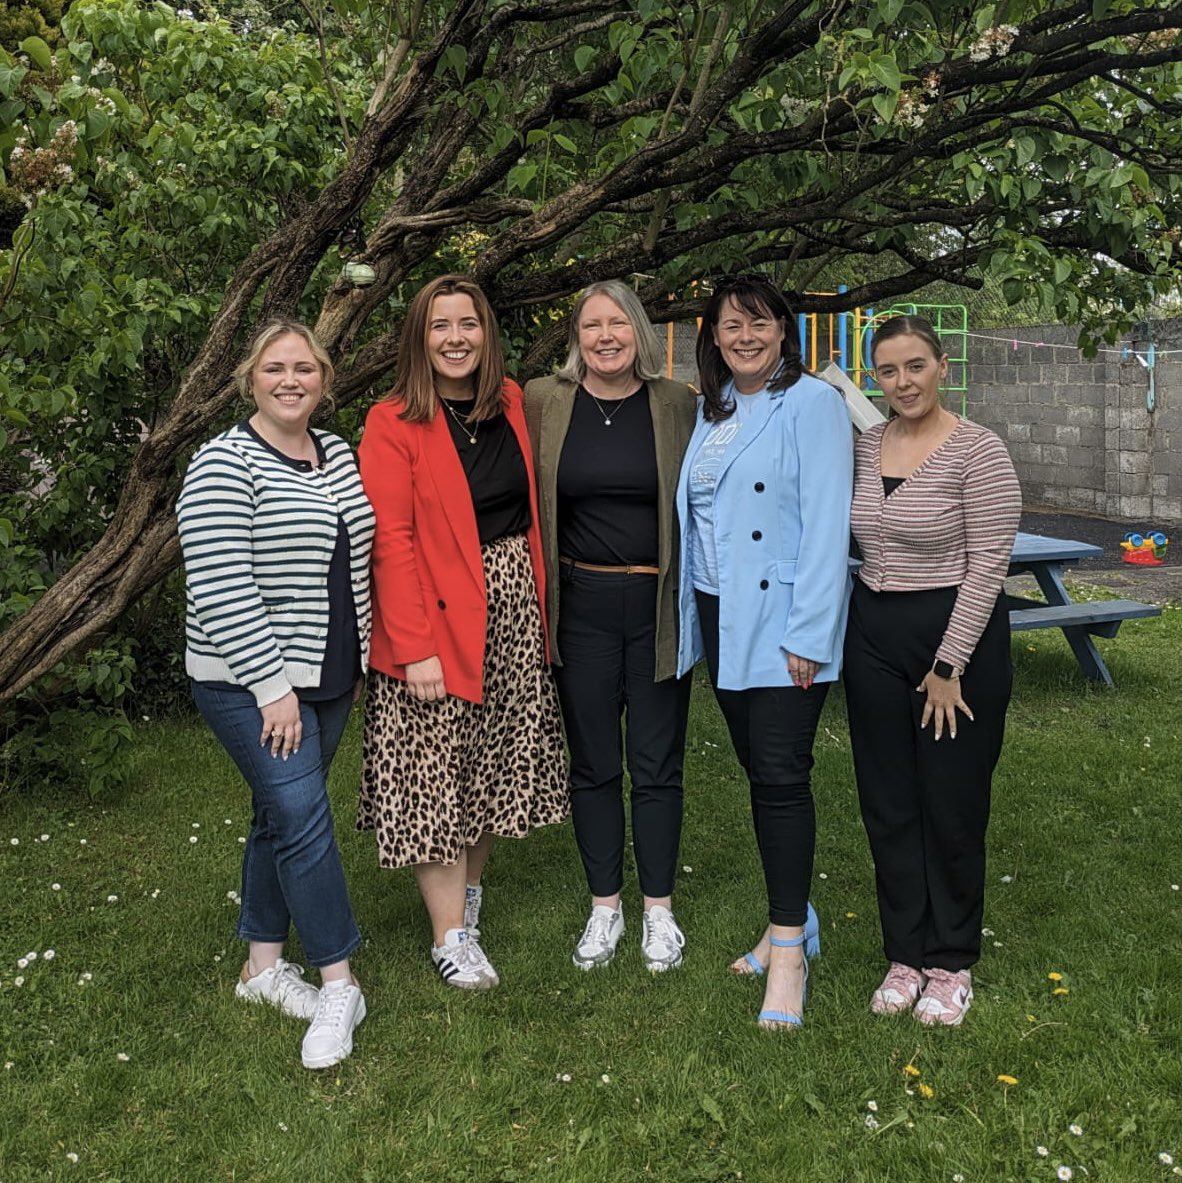 In awe of the support Meath Women’s Refuge provide for women and children affected by domestic abuse. It’s essential that these services are funded adequately. I would urge anyone suffering abuse or feeling unsafe at home to reach out to the many confidential support services.